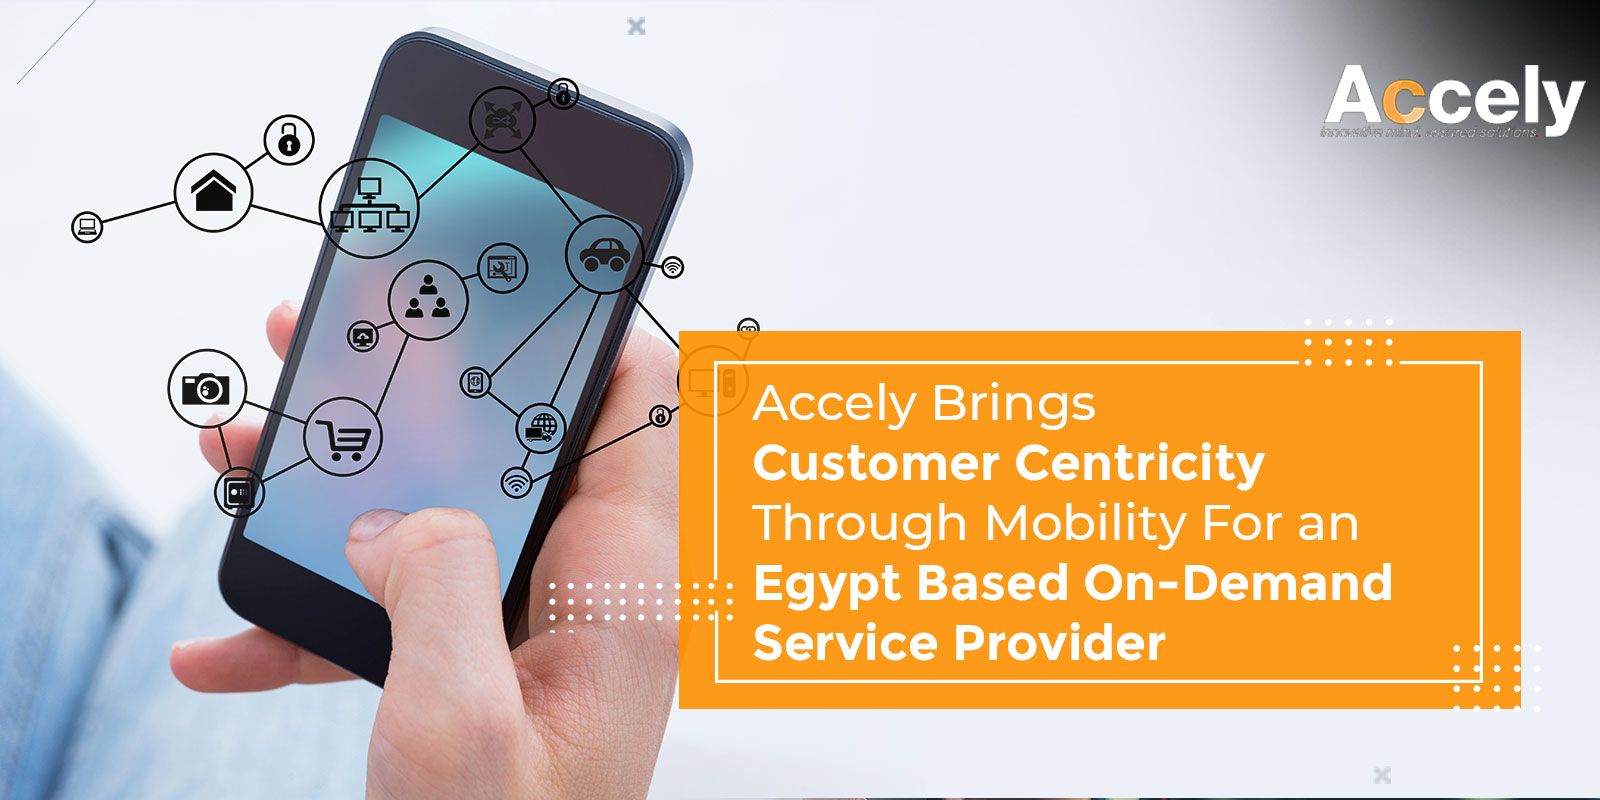 Accely brings customer centricity through mobility for an Egypt based on-demand service provider